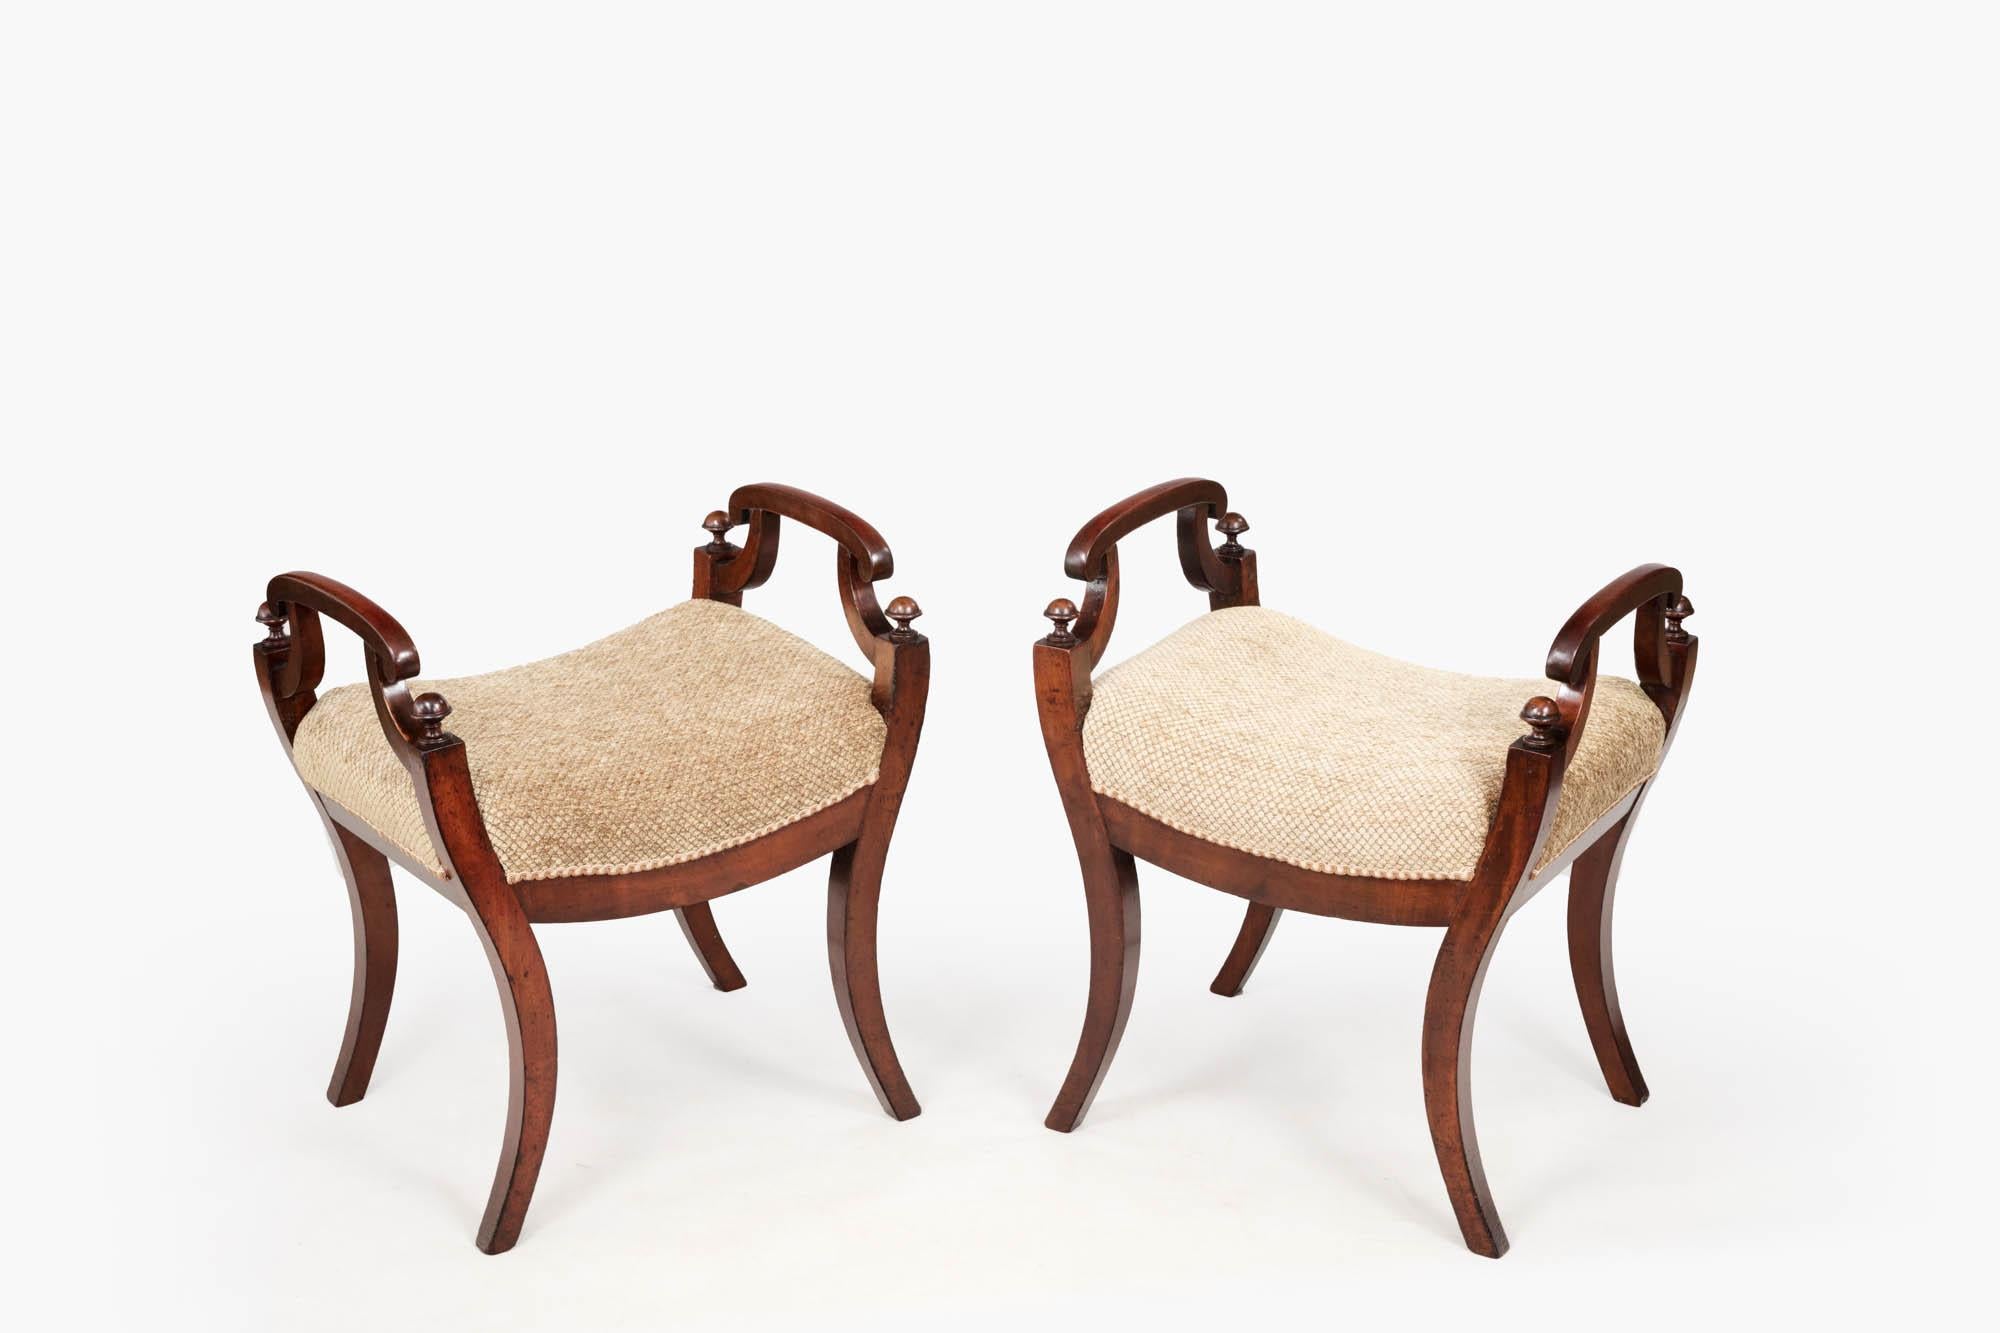 19th century pair of mahogany William IV twin-handled stools raised on simple sabre legs topped with rounded, carved finals. The seats have recently been re-upholstered in a buff-coloured fabric with braiding to the edges where it joins the wood.